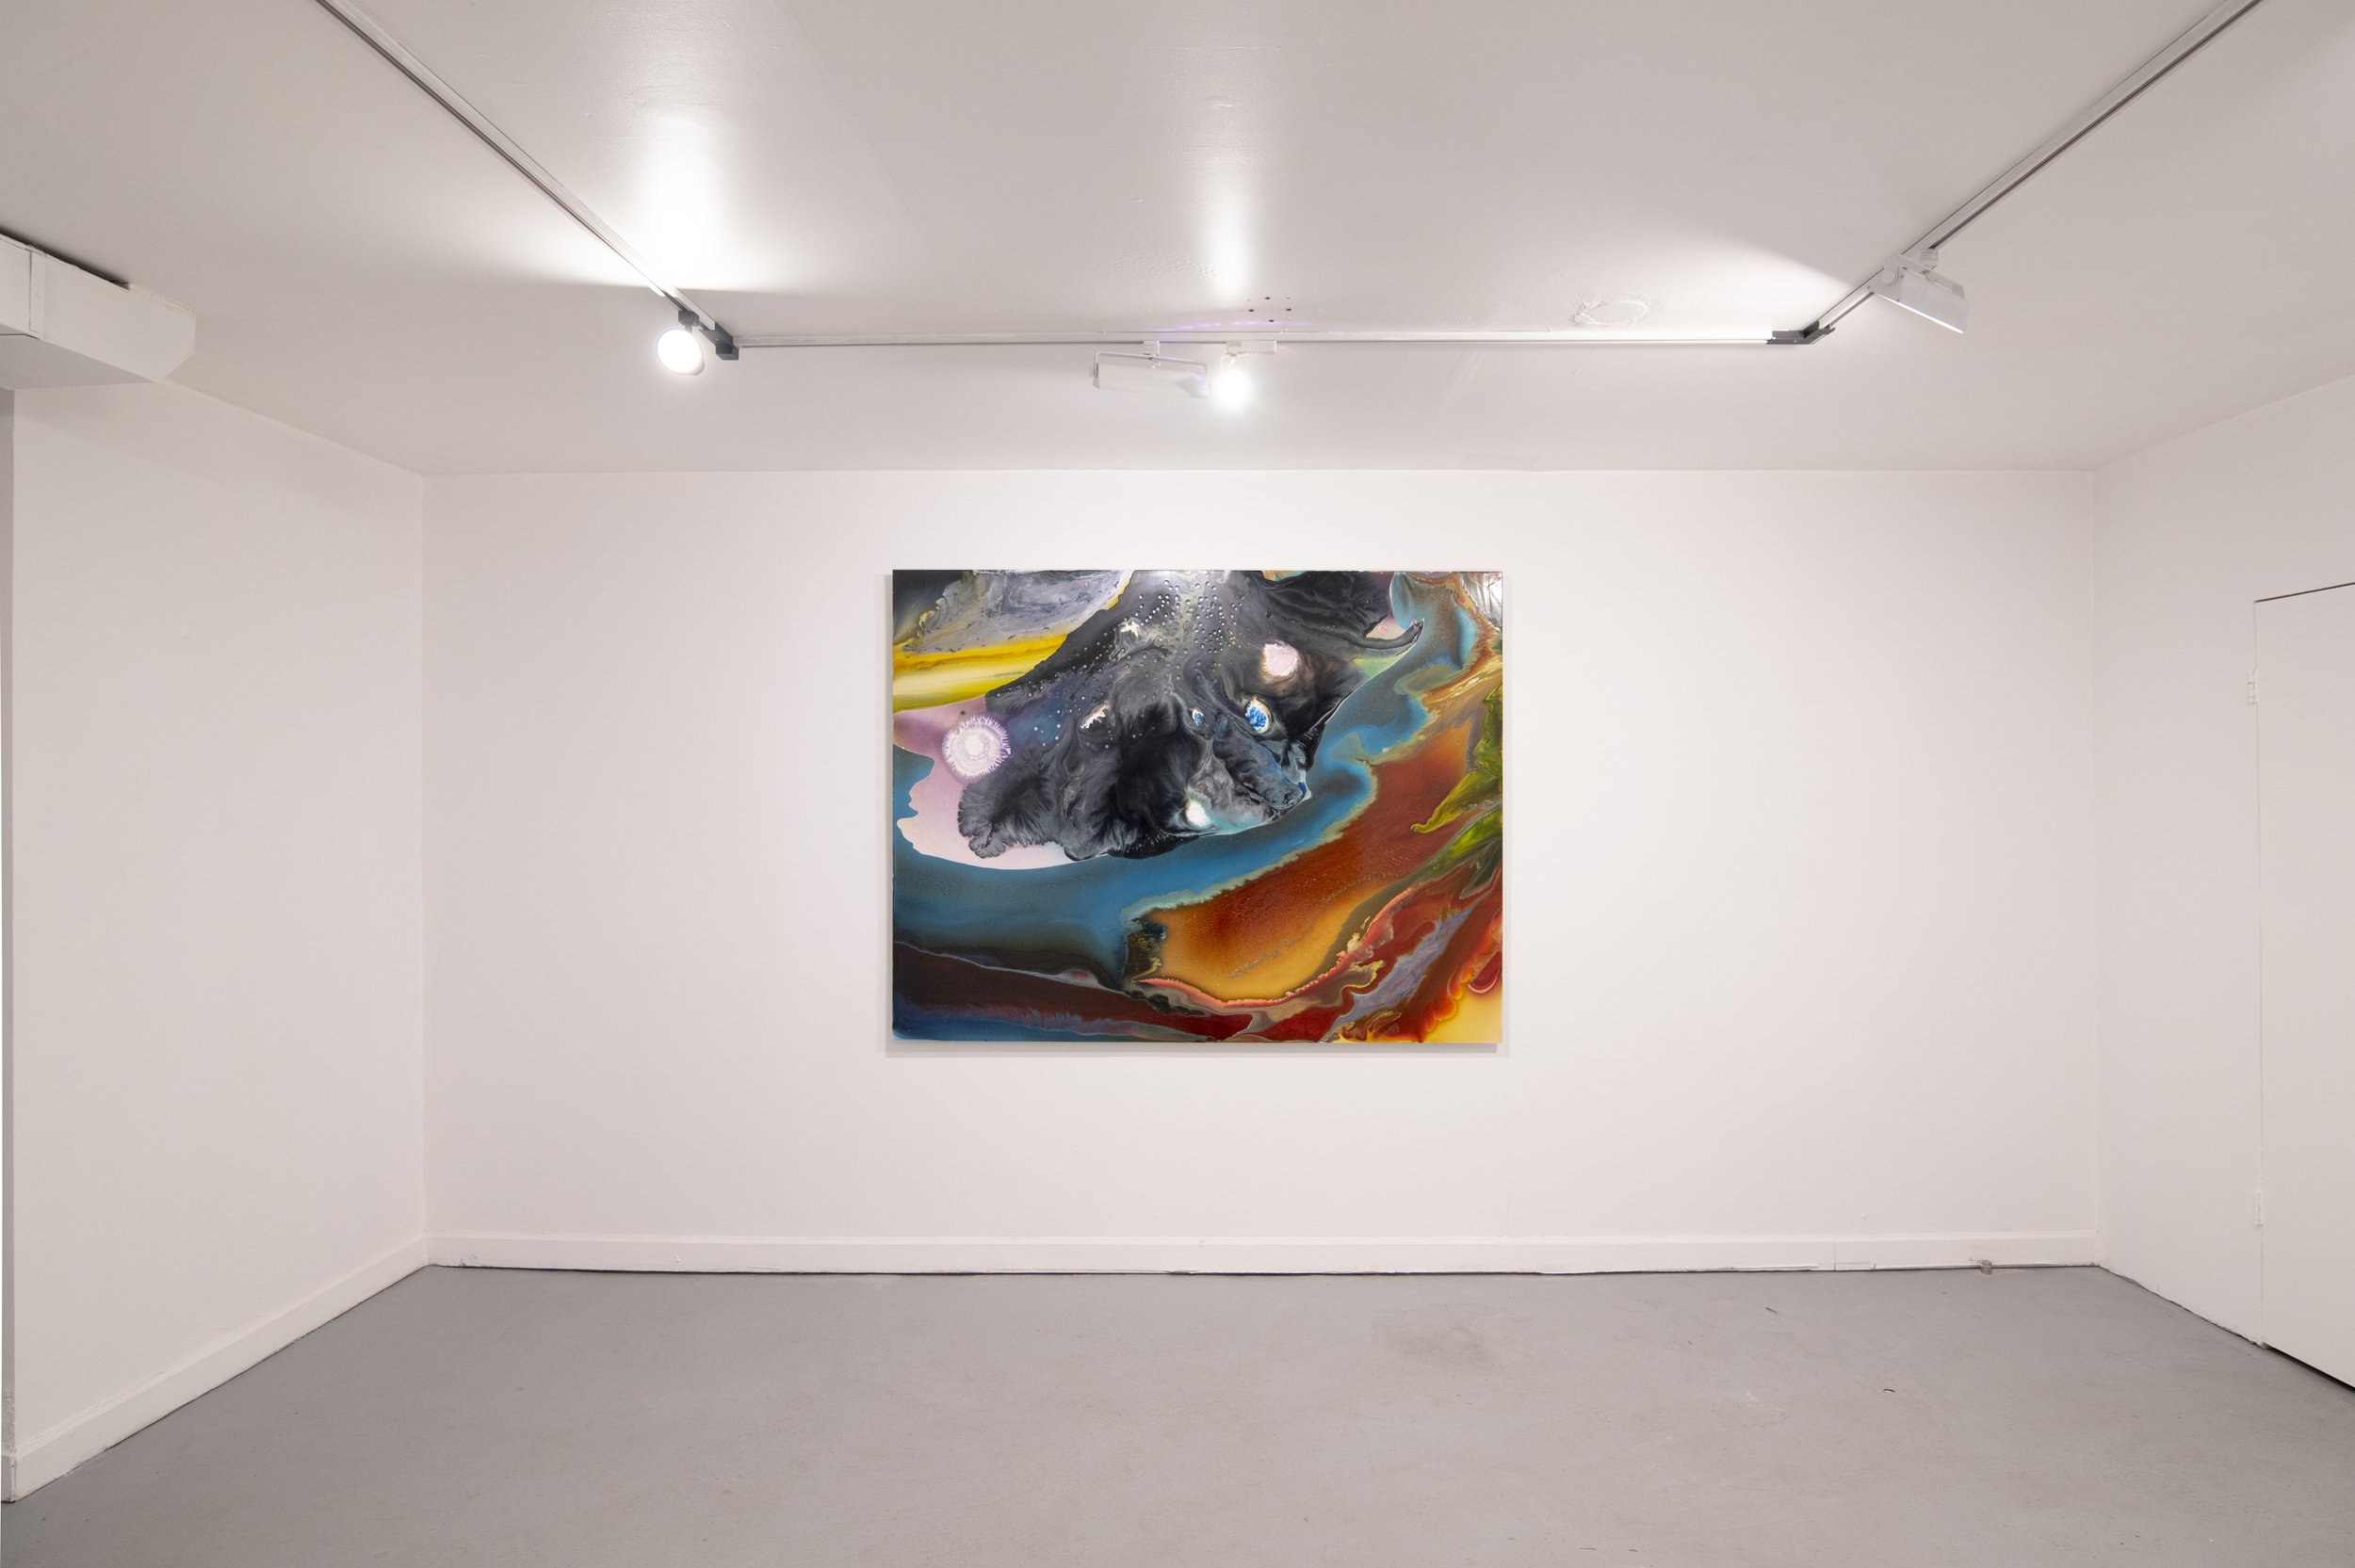 Dave Bopp: Fear of the Invisible - Installation image 2022 - Cindy Rucker Gallery (Copy)